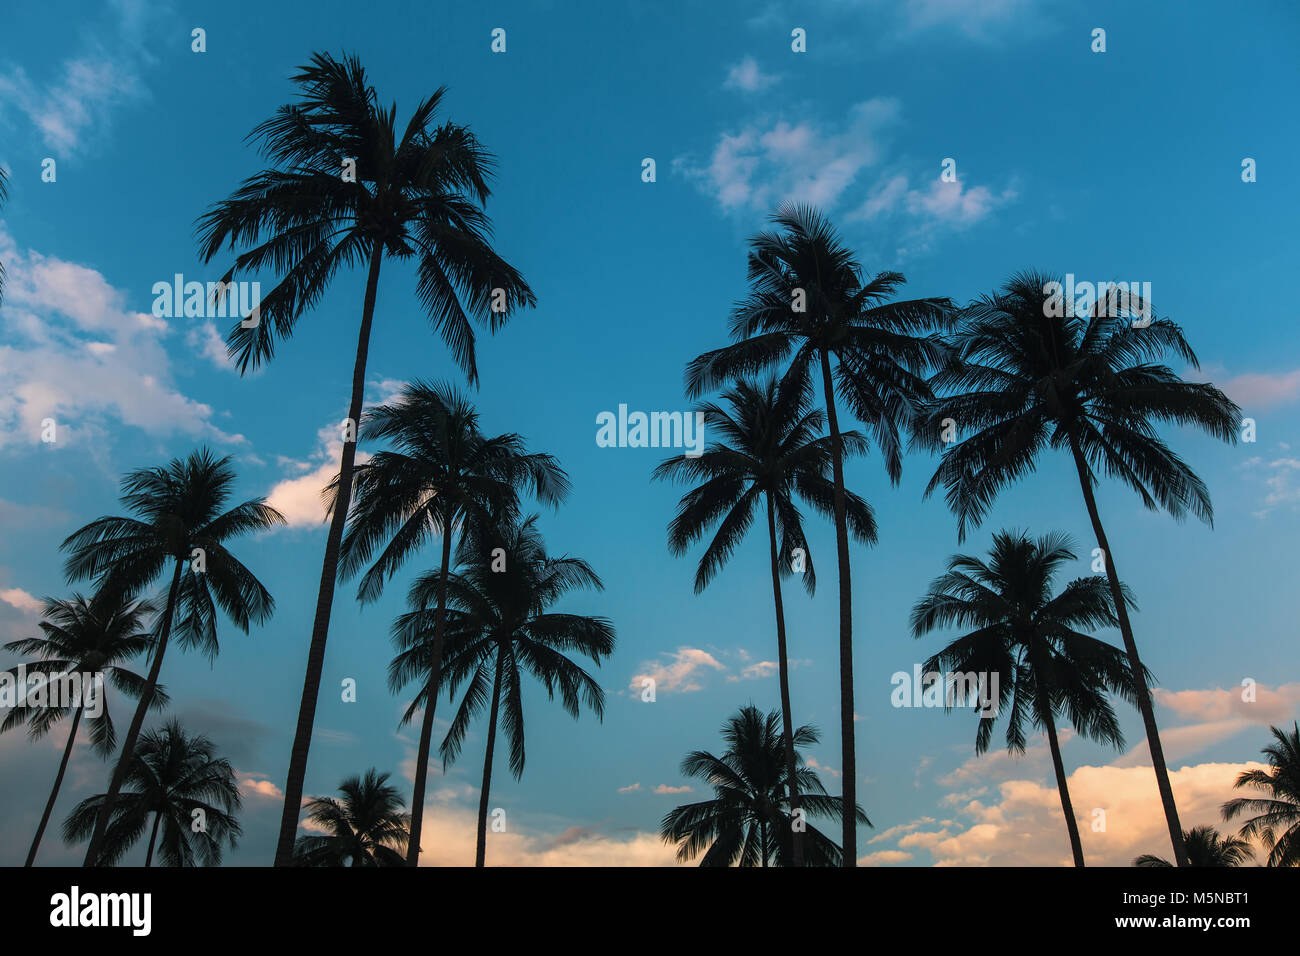 Palm trees silhouetted against a blue sky. Stock Photo